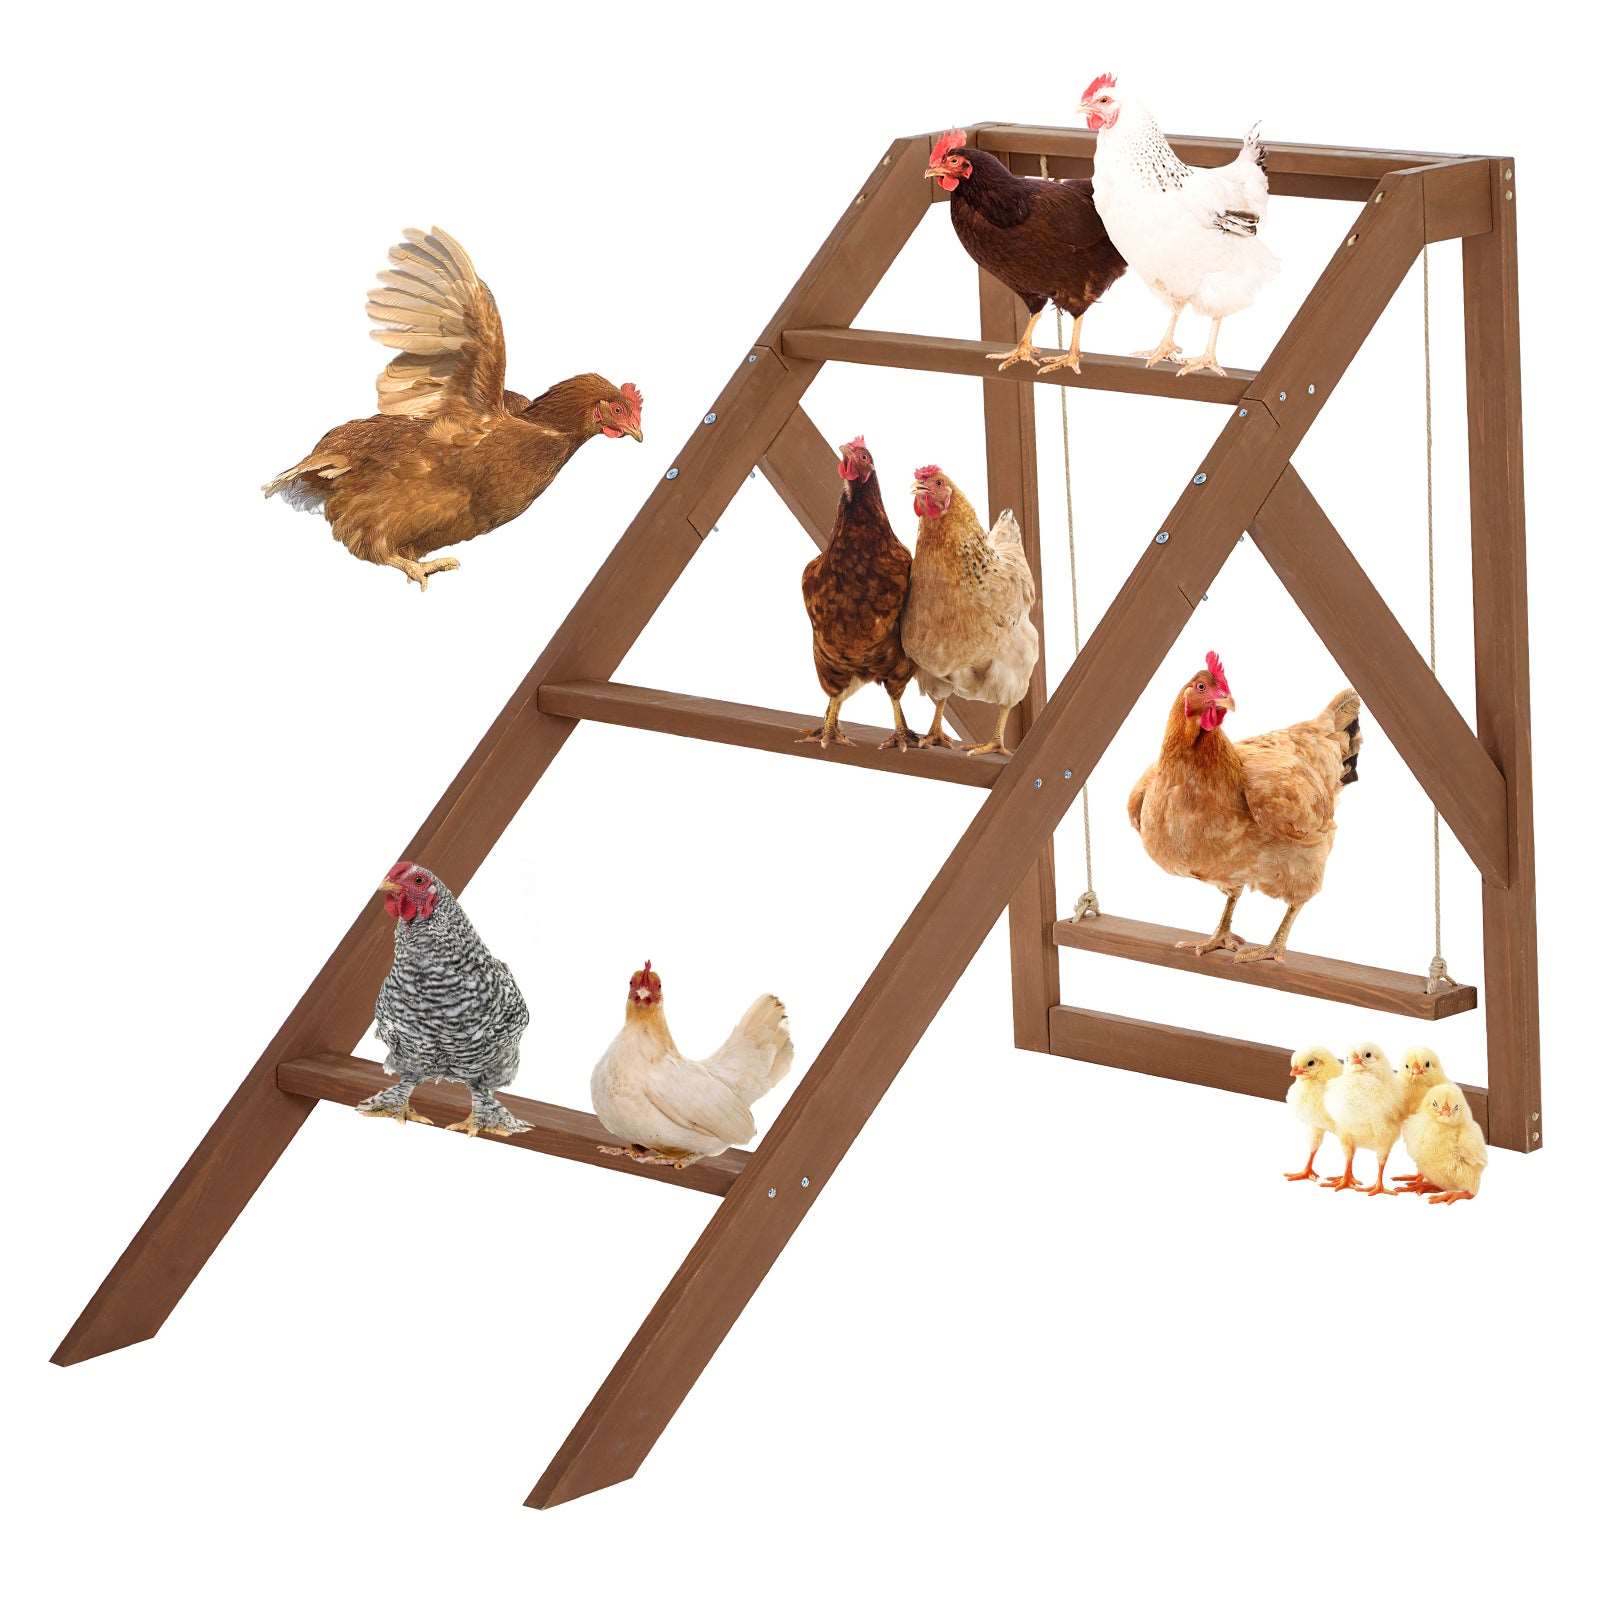 petsfit-chicken-swing-set-for-pets-healthy-happy-4-chicken-perches-with-swing-fit-for-8-10-chicks-chicken-toys-for-coop-accessories-01